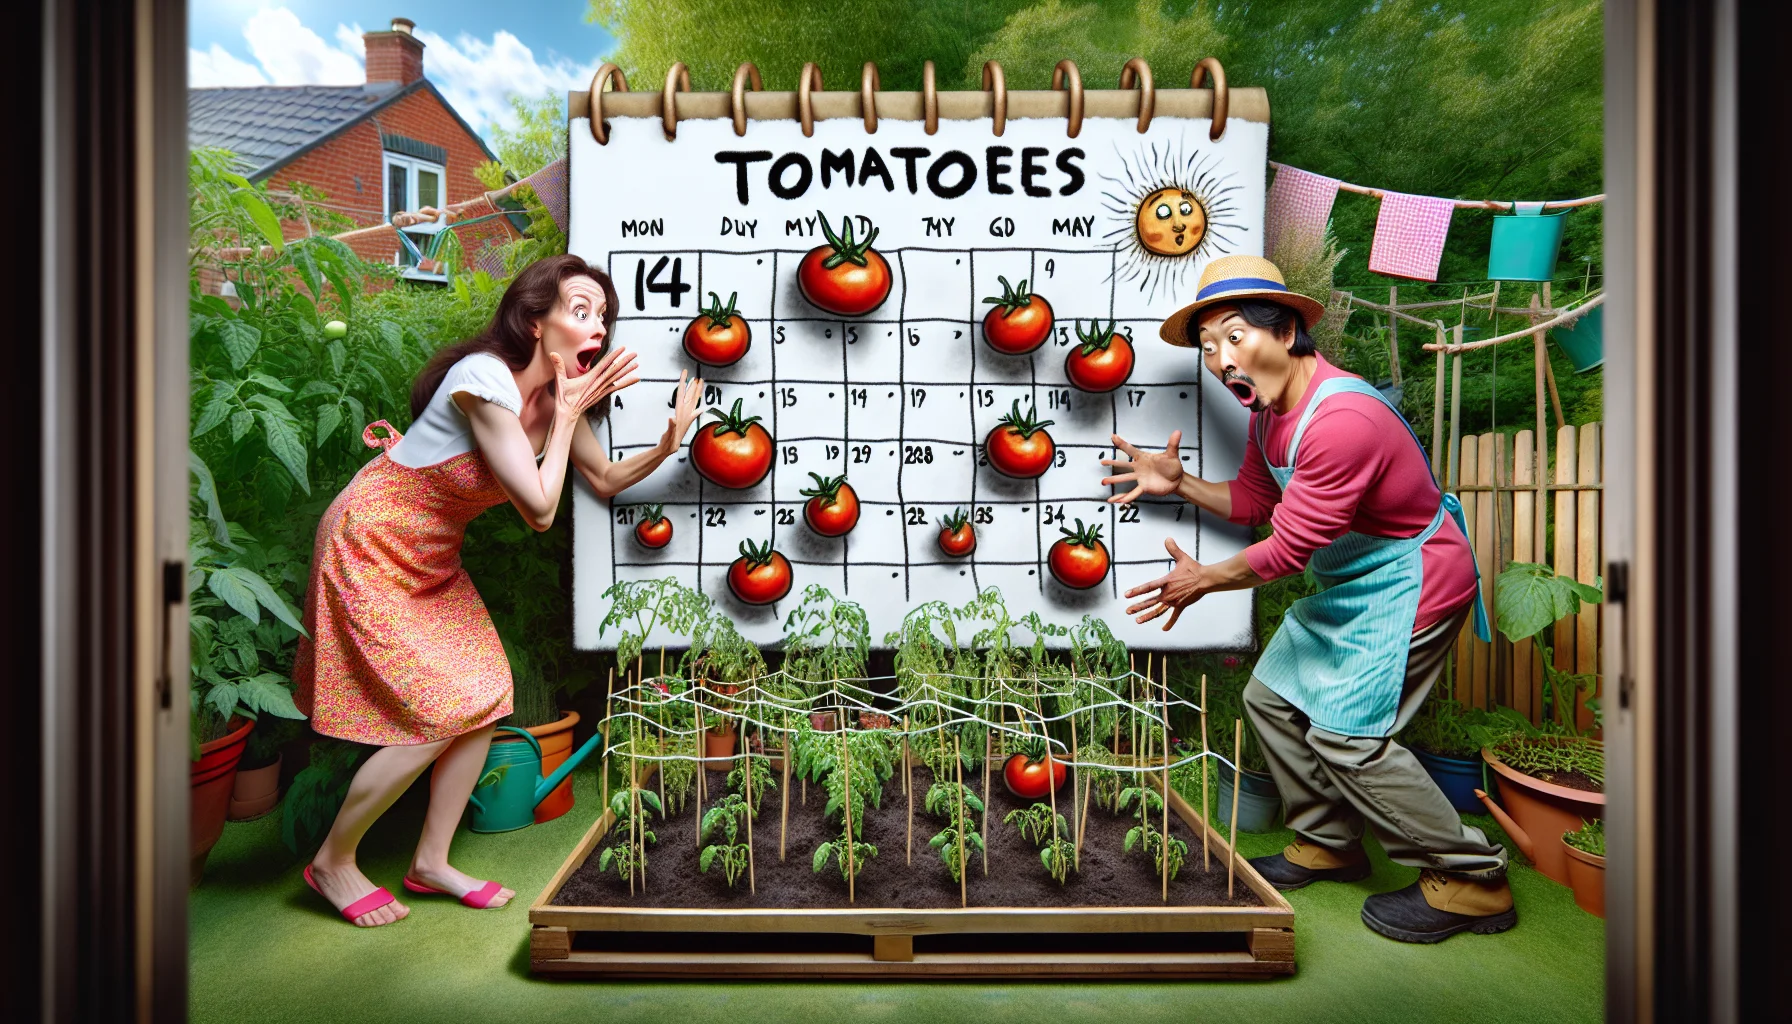 Imagine a humorous gardening scene: A Caucasian woman and a South Asian man, both dressed in colorful gardening attire, with exaggerated expressions of astonishment, are consulting a large, whimsical calendar hanging in their lush backyard filled with a variety of plants. Emphasize the word 'TOMATOES' scribbled in comical, bold letters on a sunny date in the calendar, with miniature tomato plants eagerly jumping off the page as if they're impatient to be planted.